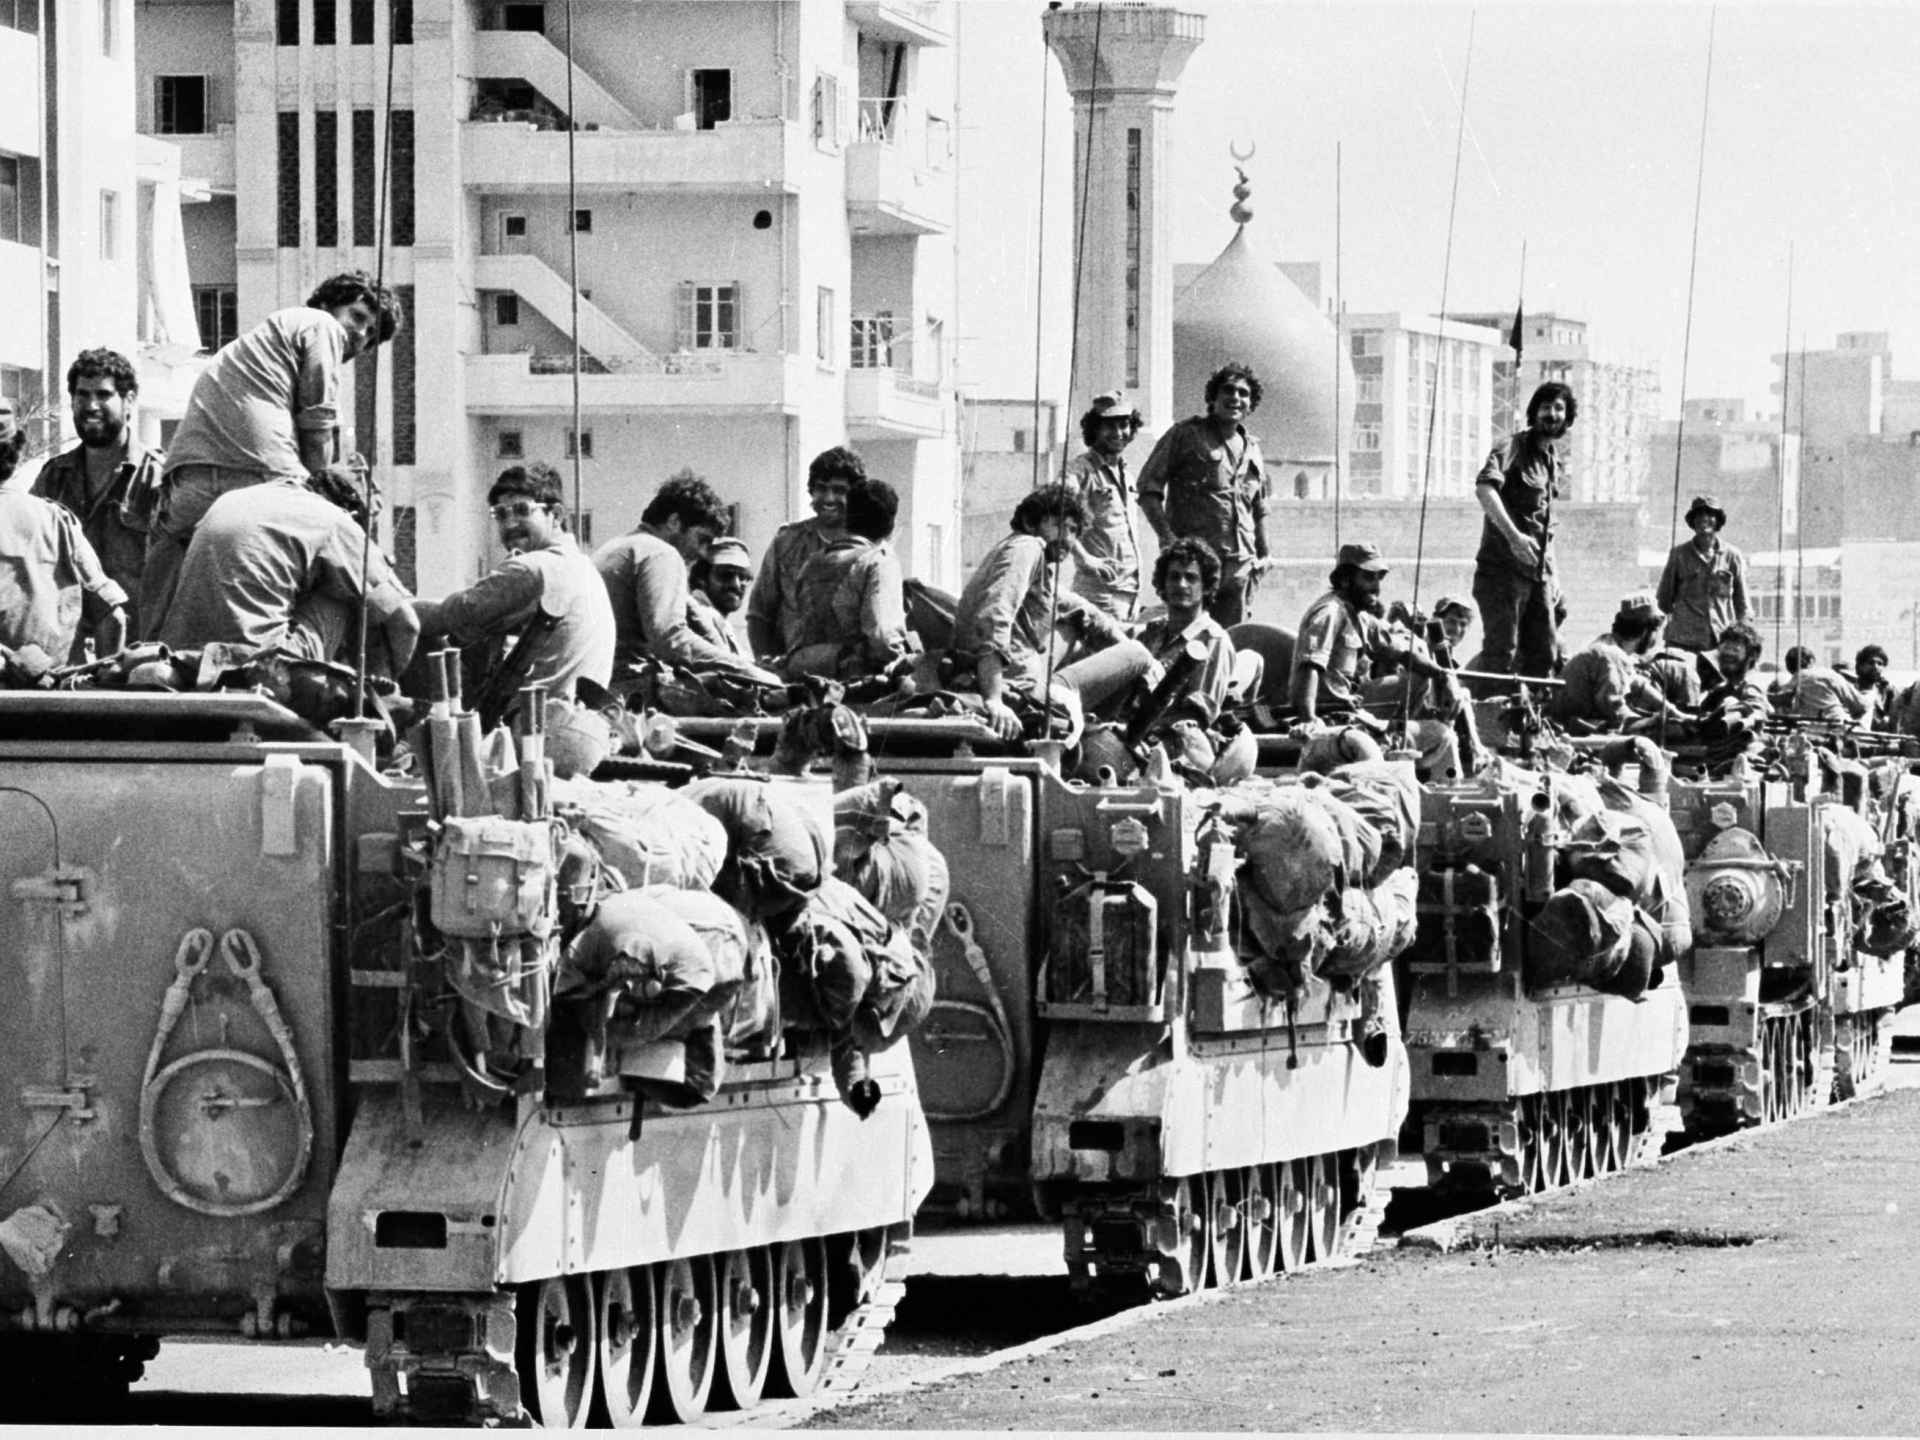 survivors-of-israel’s-siege-of-beirut-see-history-repeating-itself-in-gaza